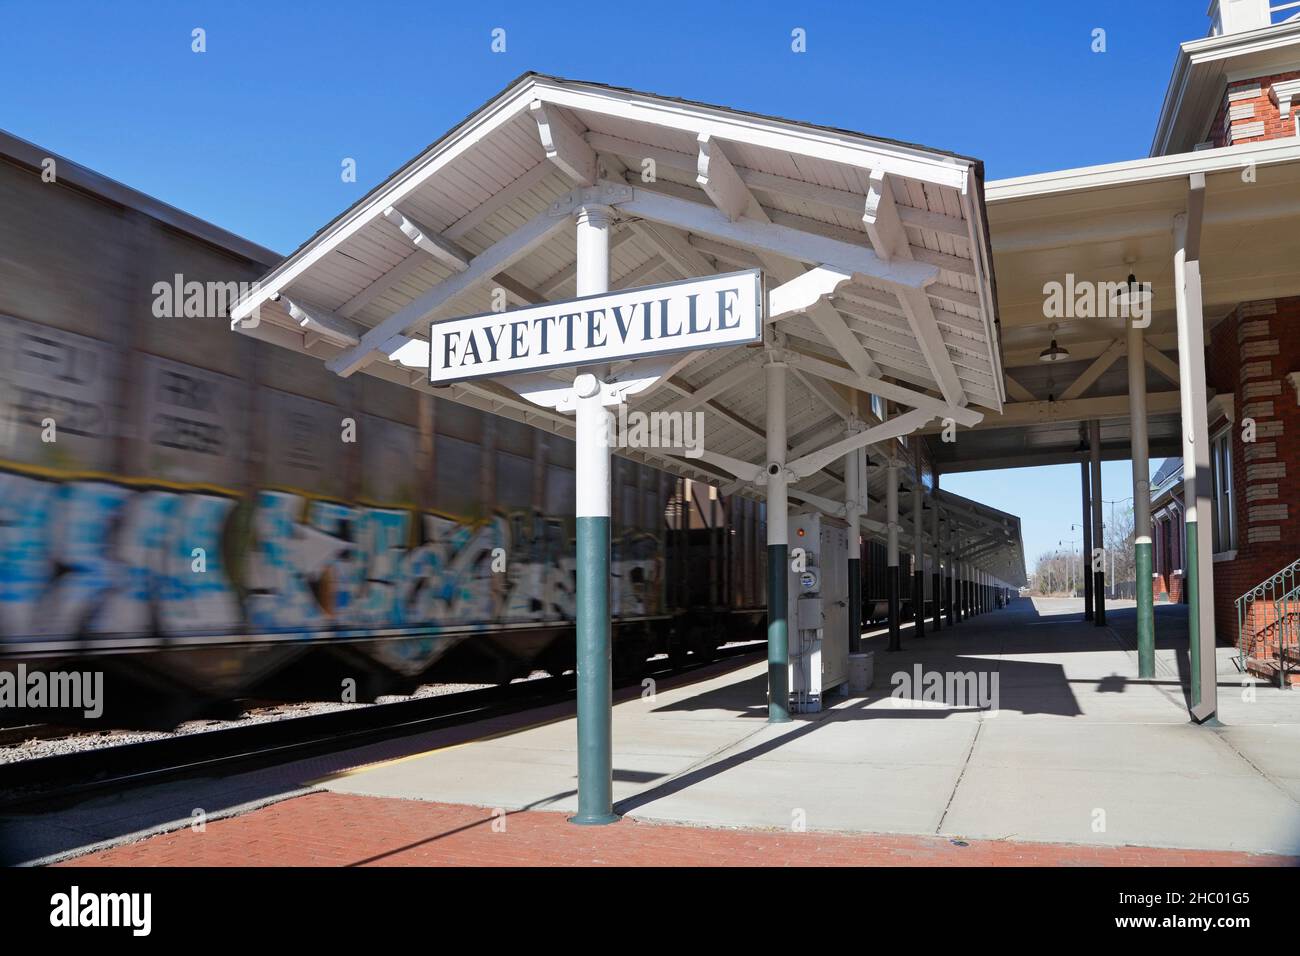 Fayetteville train station in North Carolina with passing cargo train Stock Photo